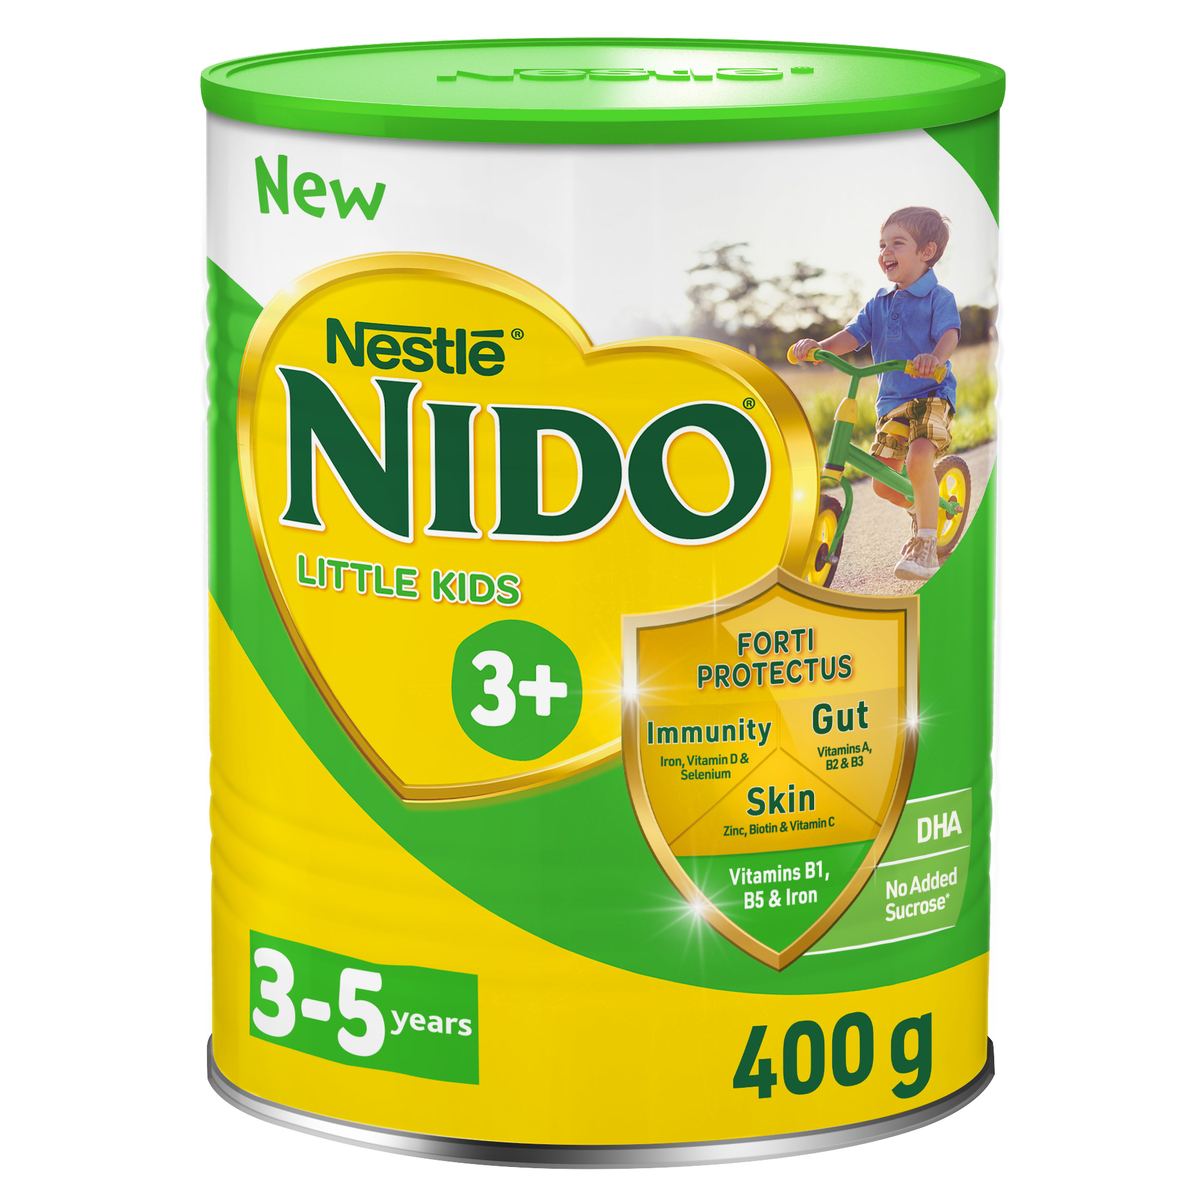 Nestle Nido Little Kids 3+ Growing Up Milk For Toddlers 3-5 Years 400g